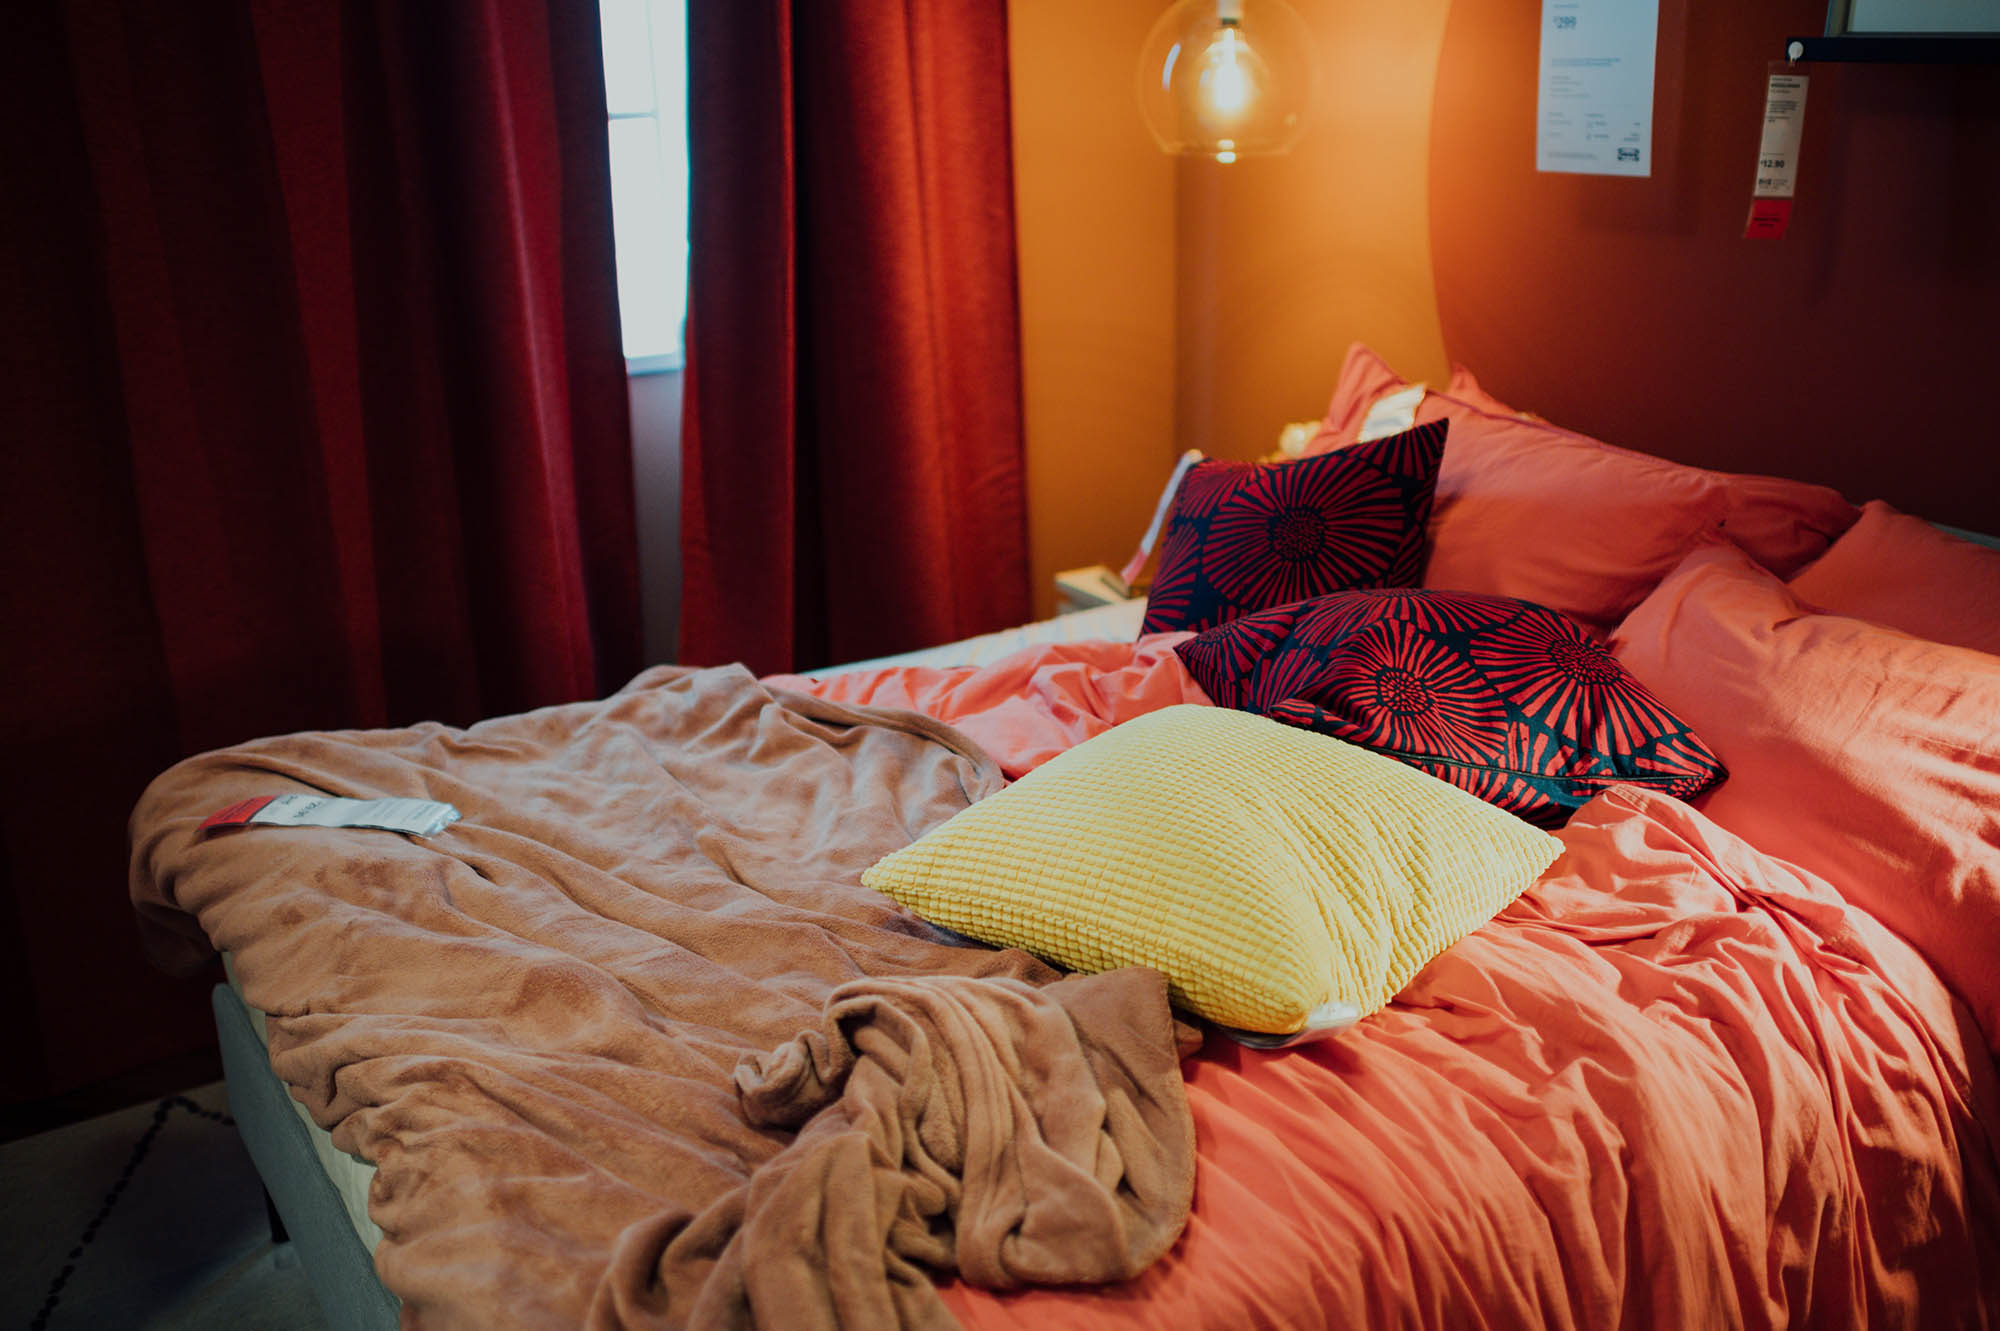 Messy room - rules for staying in hostels article